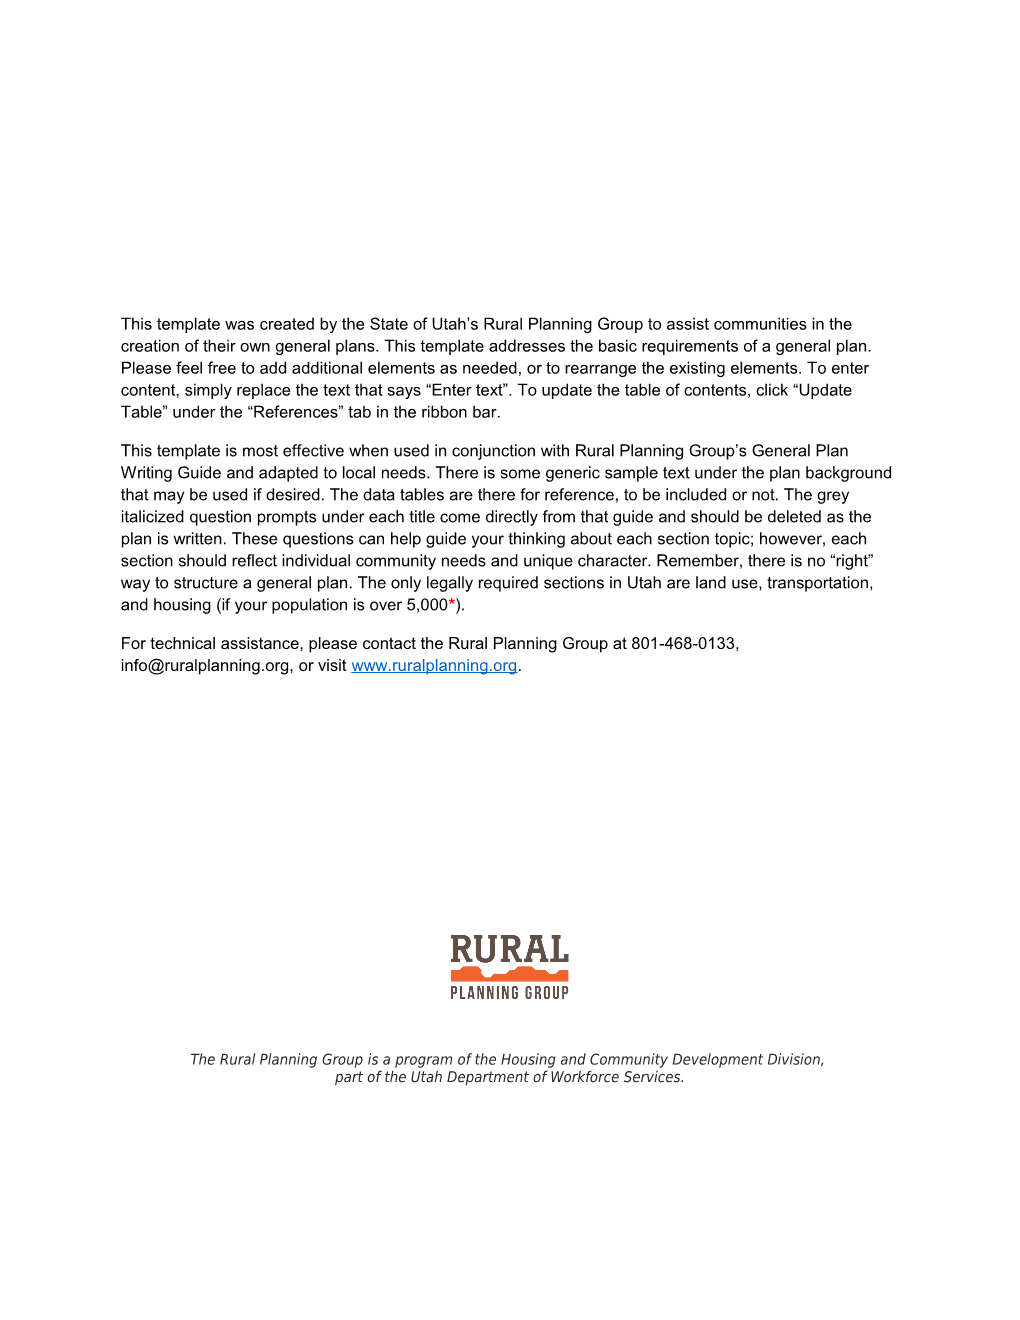 For Technical Assistance, Please Contact the Rural Planning Group at 801-468-0133, , Or Visit